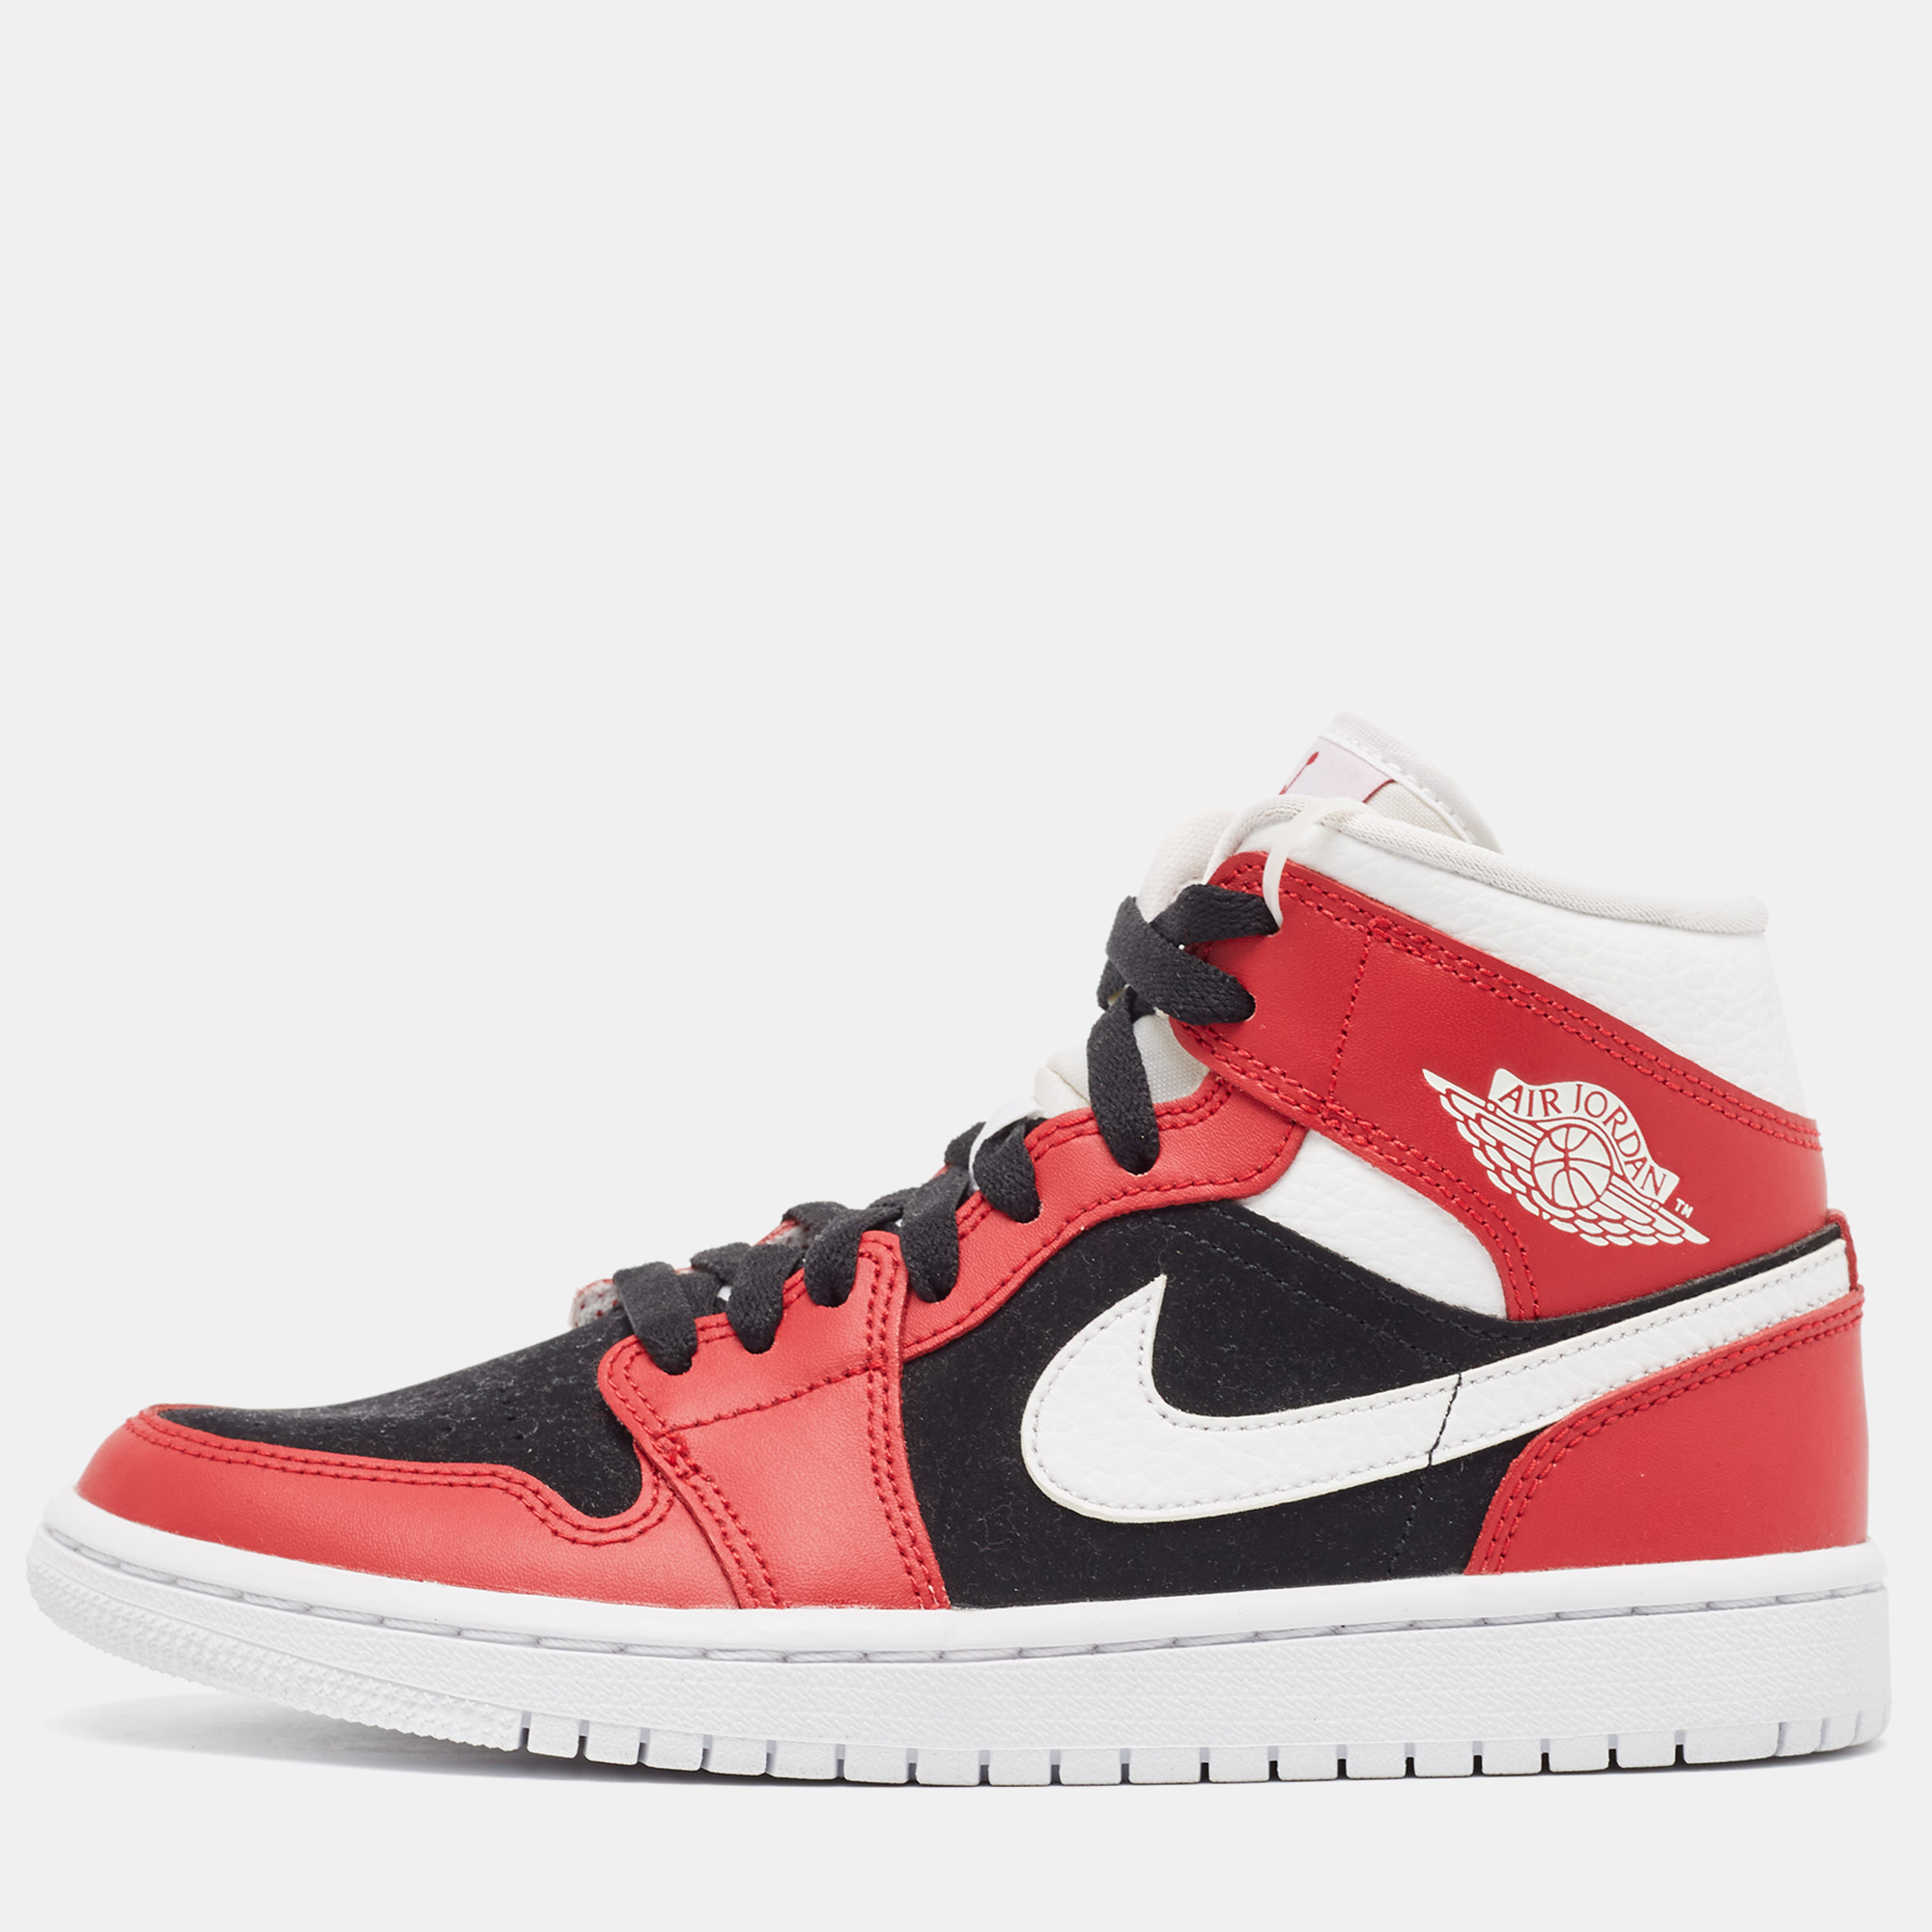 Air jordans red/white leather air jordan 1 mid gy, red white sneakers  size 37.5